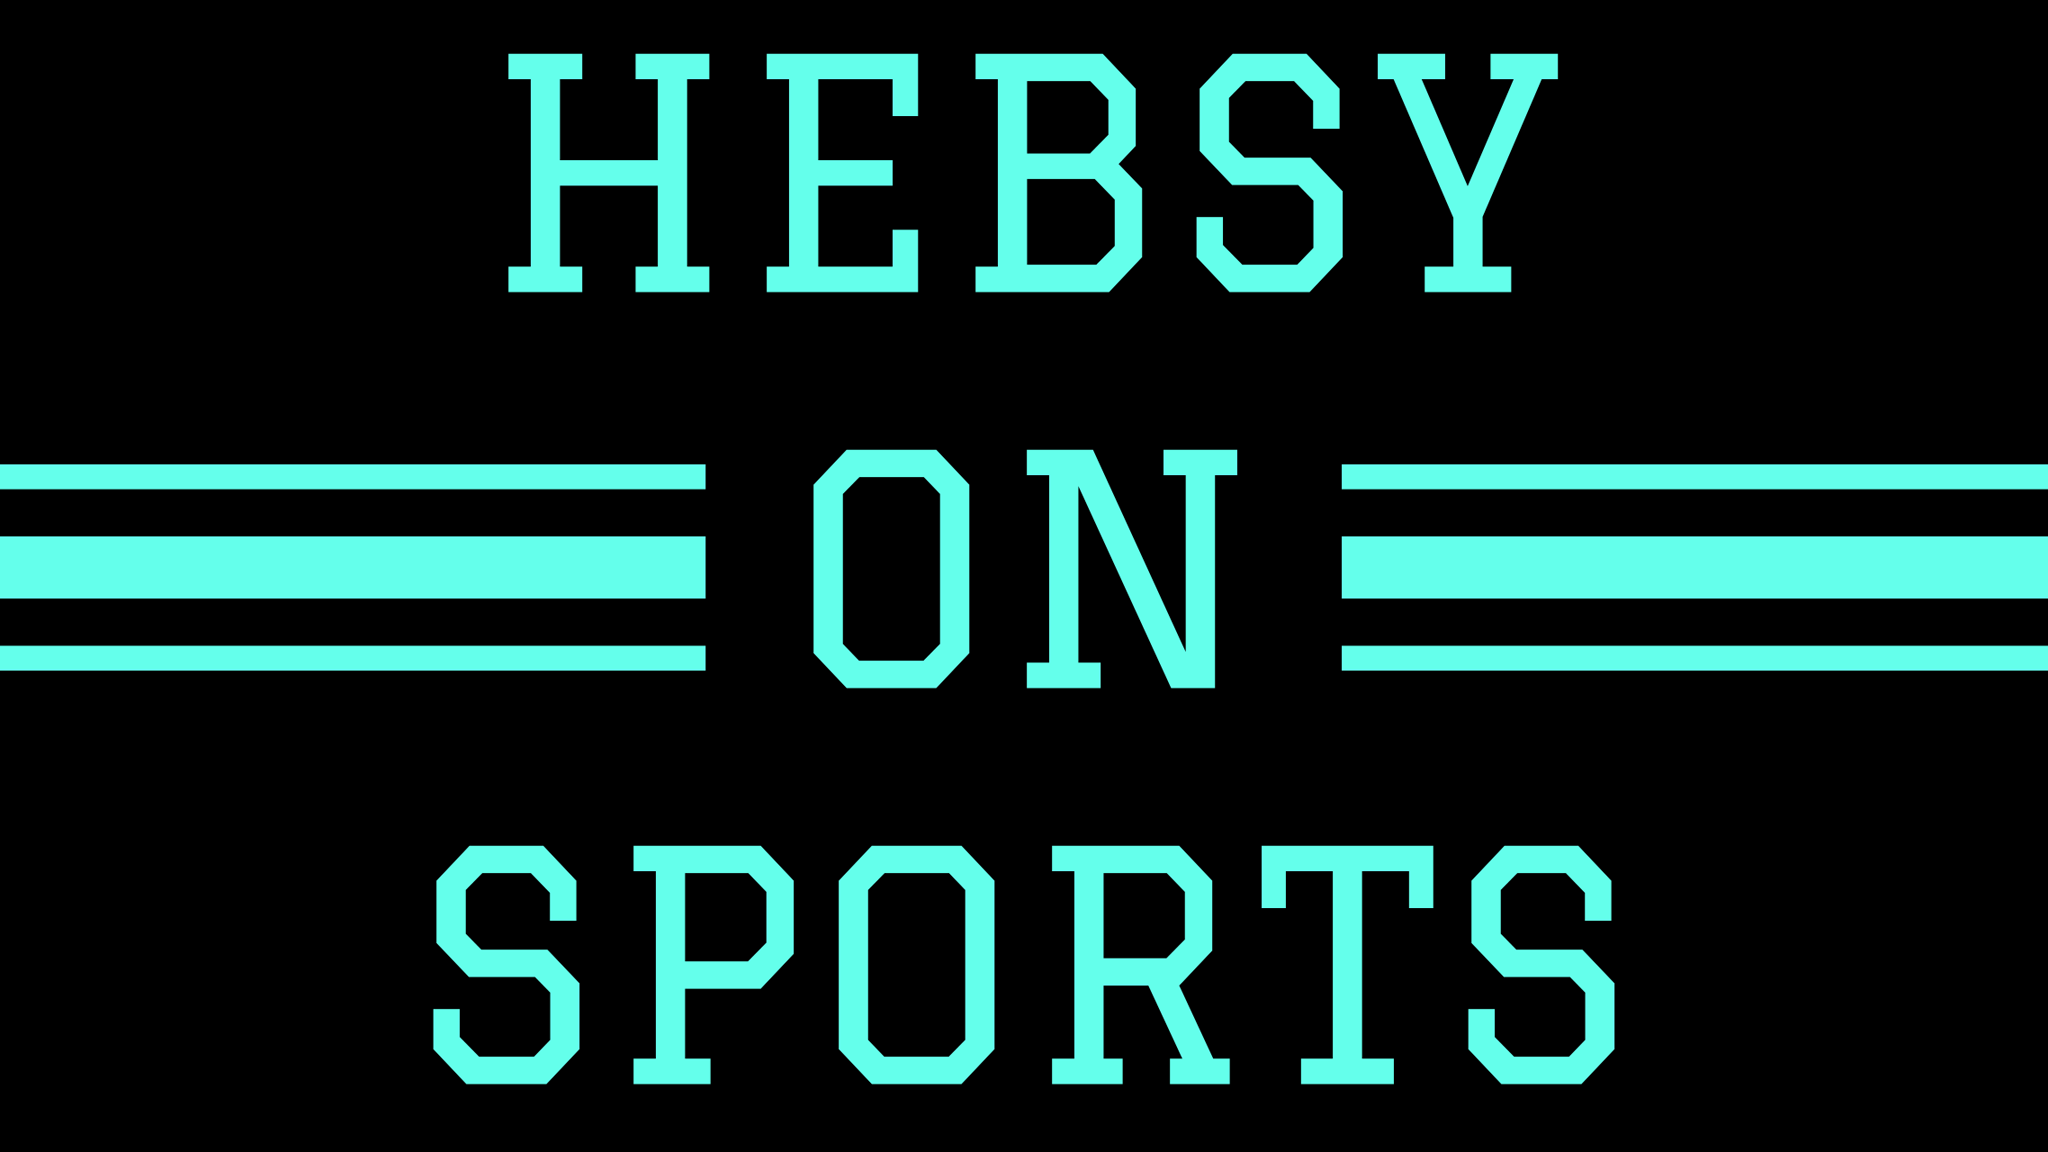 Hebsy on Sports for November 5, 2021